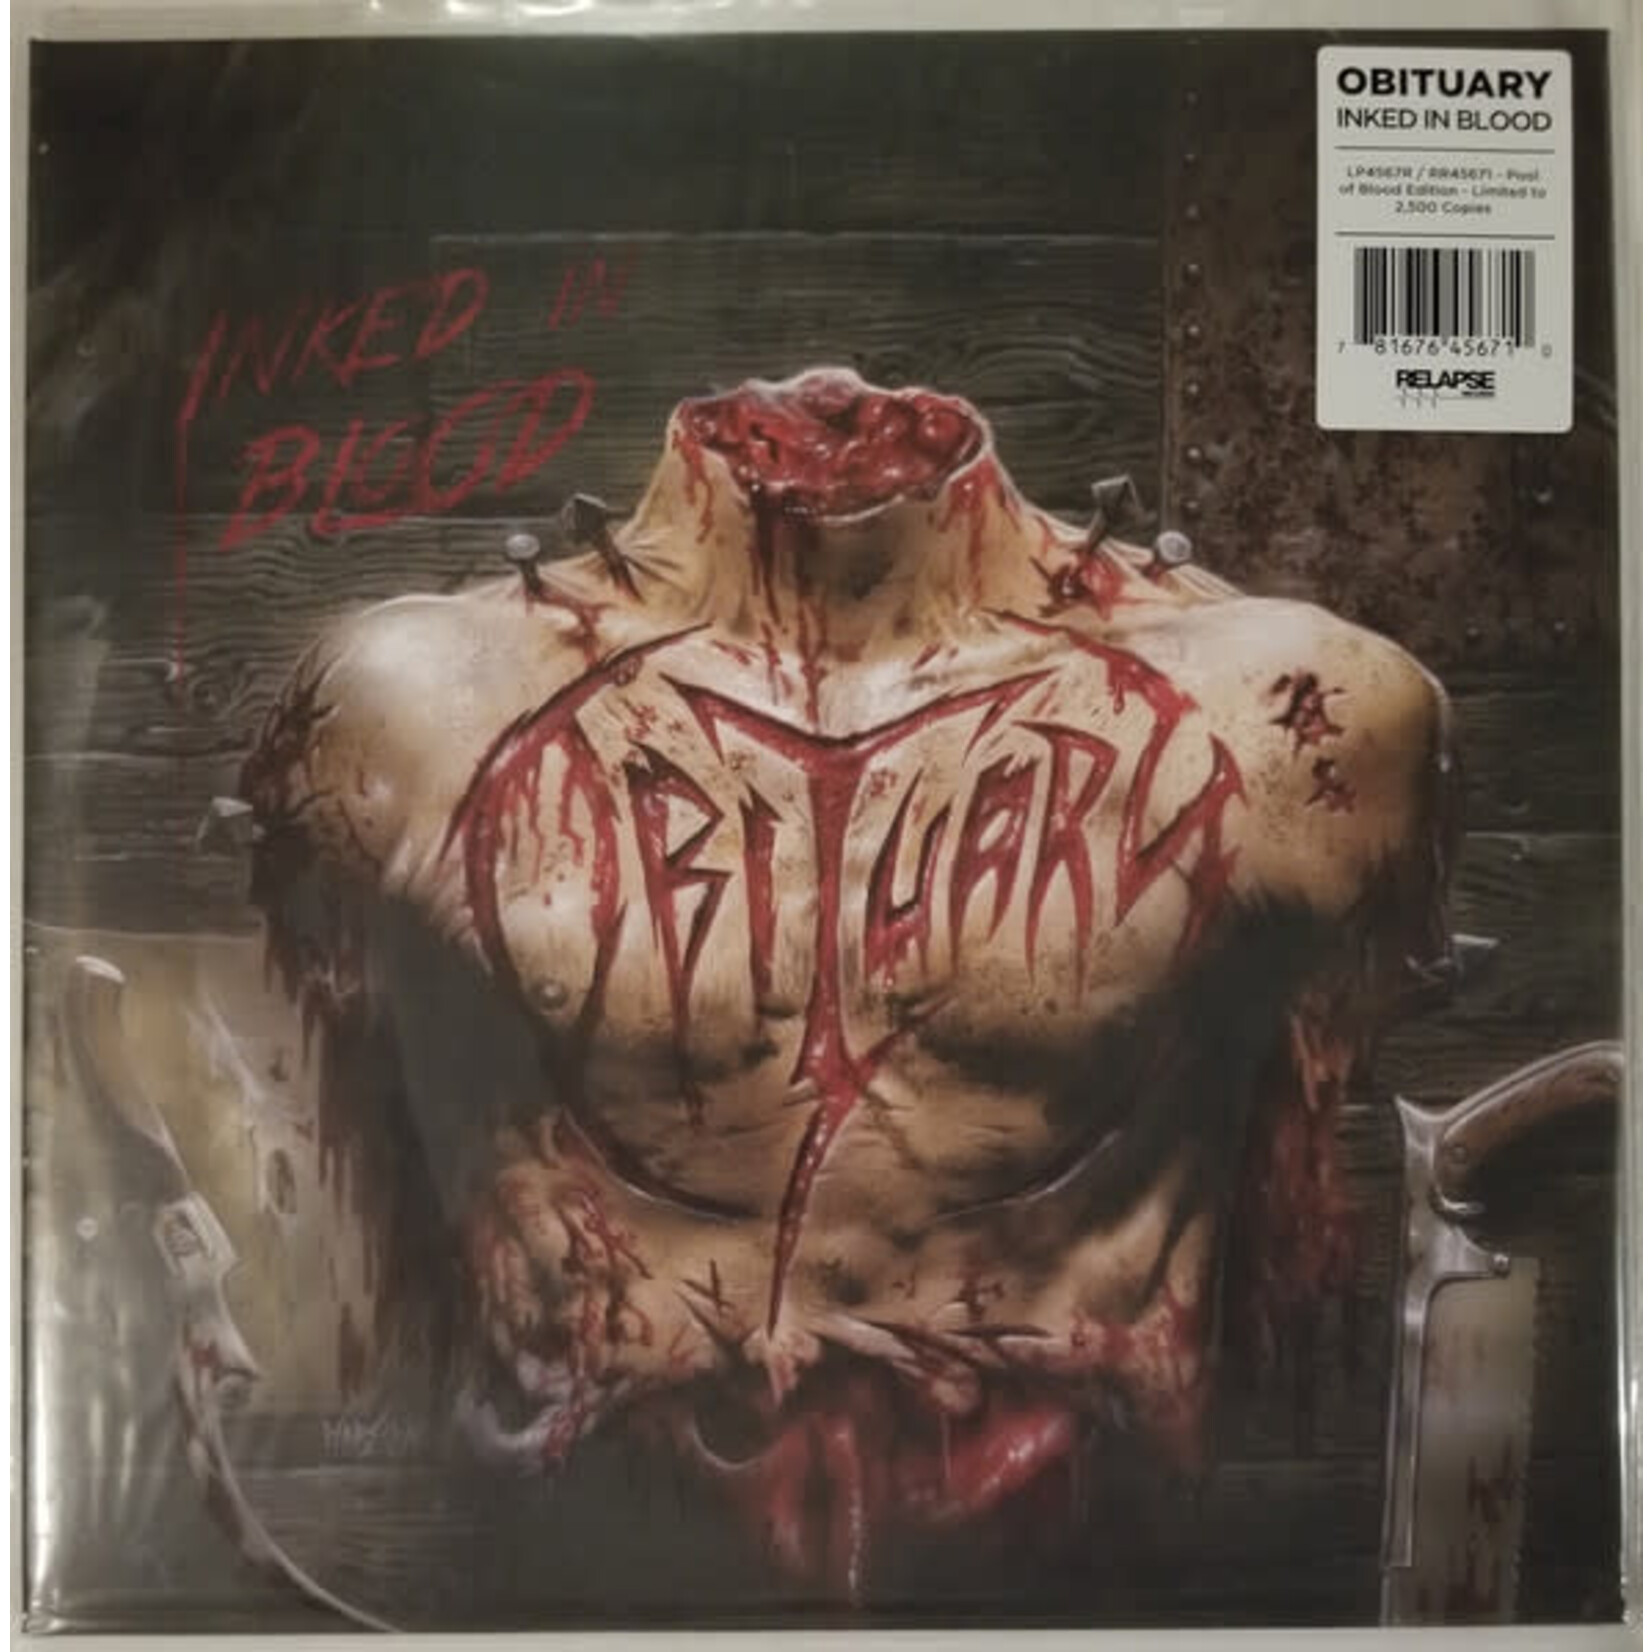 Relapse Obituary - Inked In Blood (2LP) [Cloudy Blood]